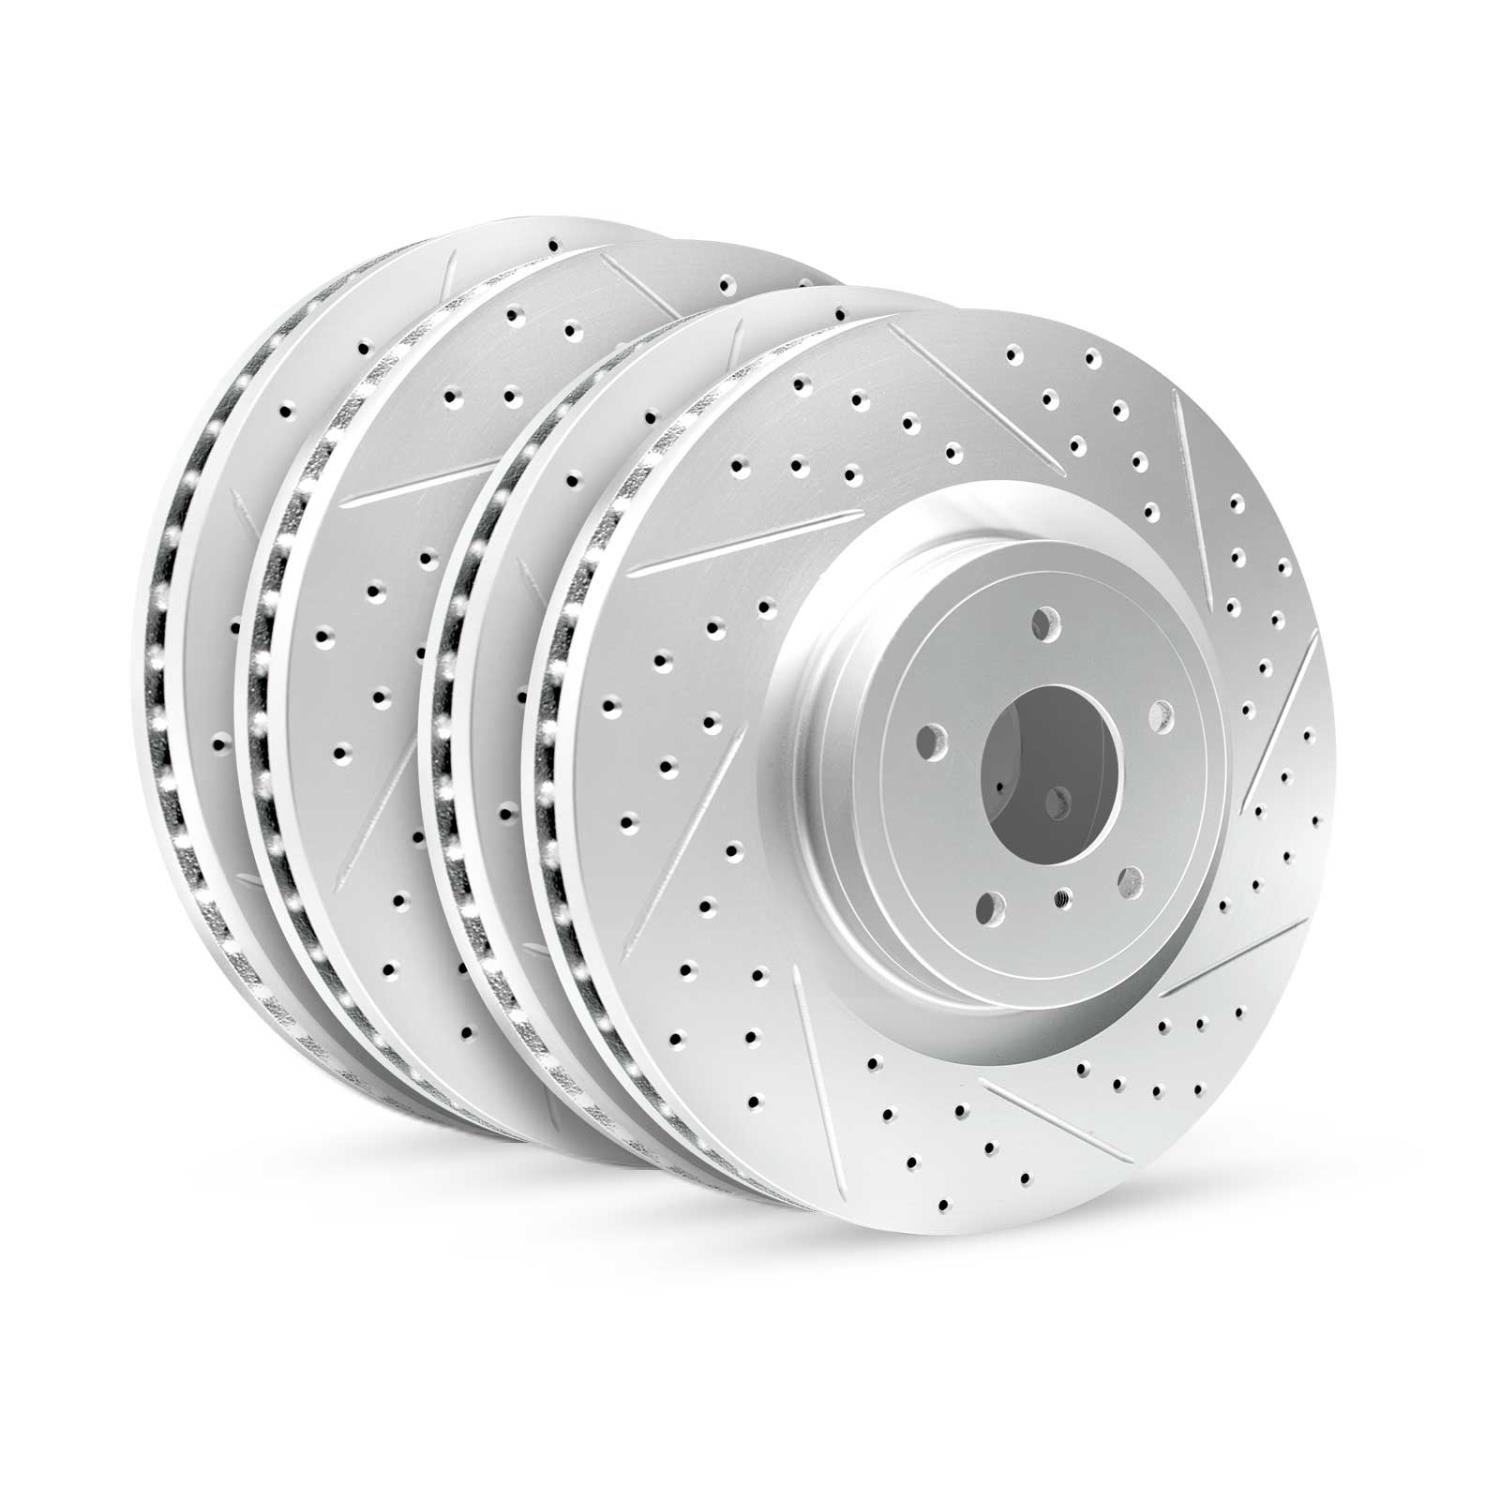 GEO-Carbon Drilled/Slotted Rotors, 2013-2019 Kia/Hyundai/Genesis, Position: Front/Rear